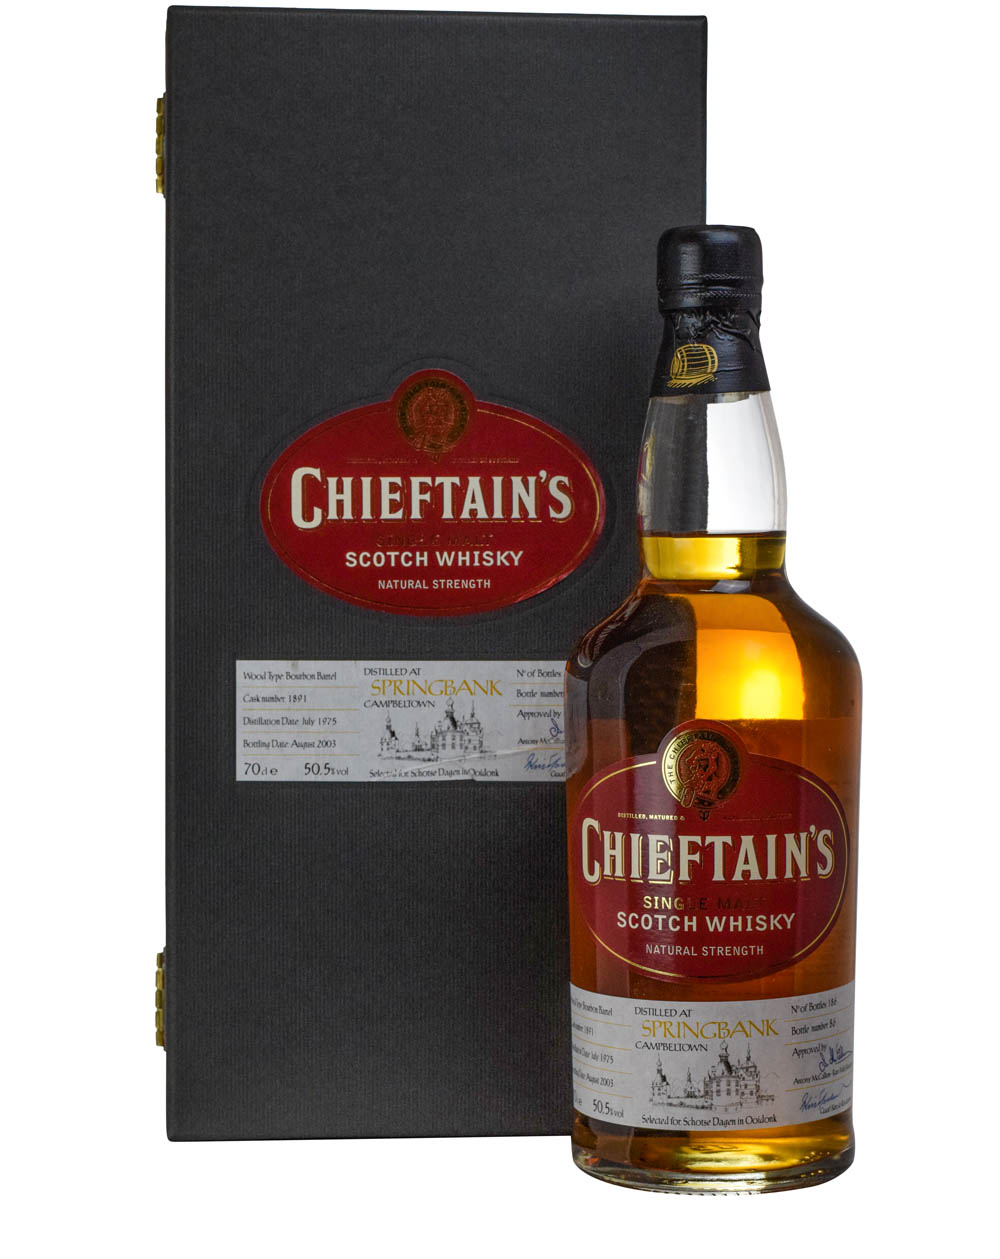 Springbank 28 Years Old Chieftain's 1975-2003 Box Must Have Malts MHM